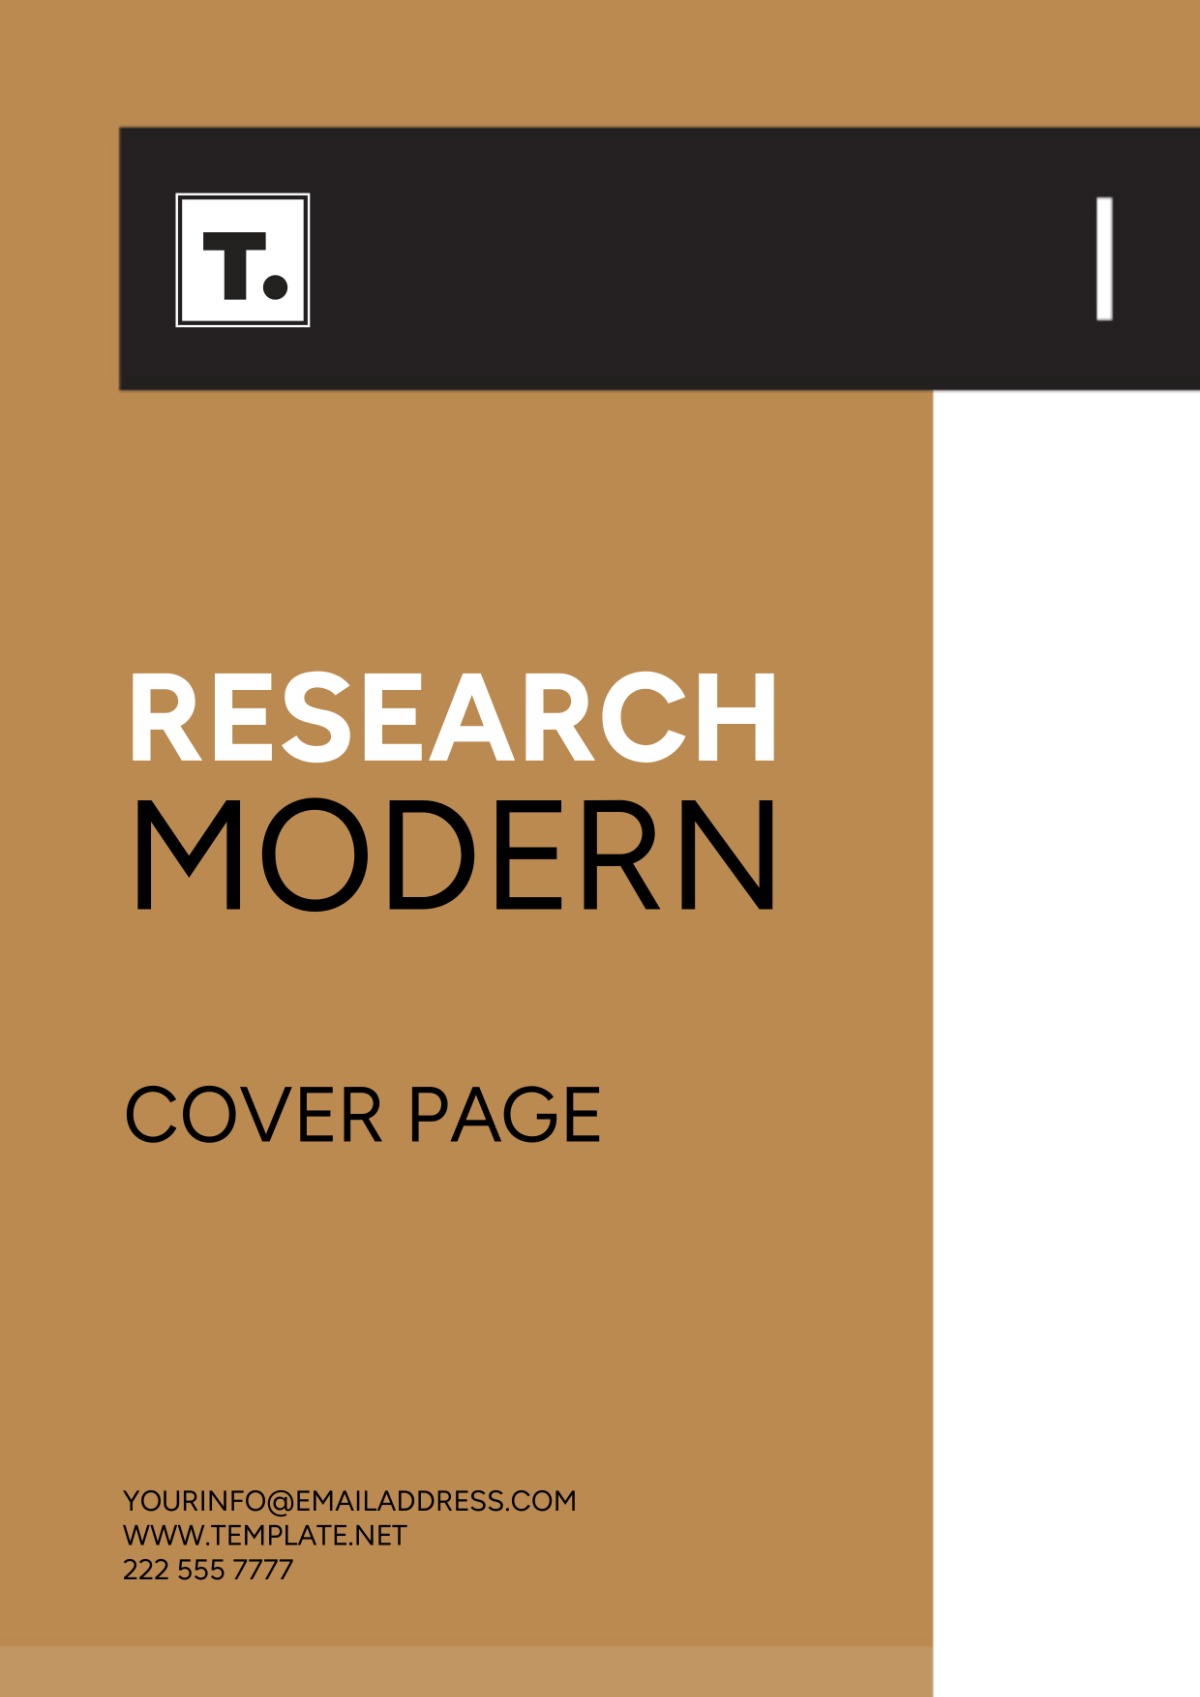 Research Modern Cover Page Template